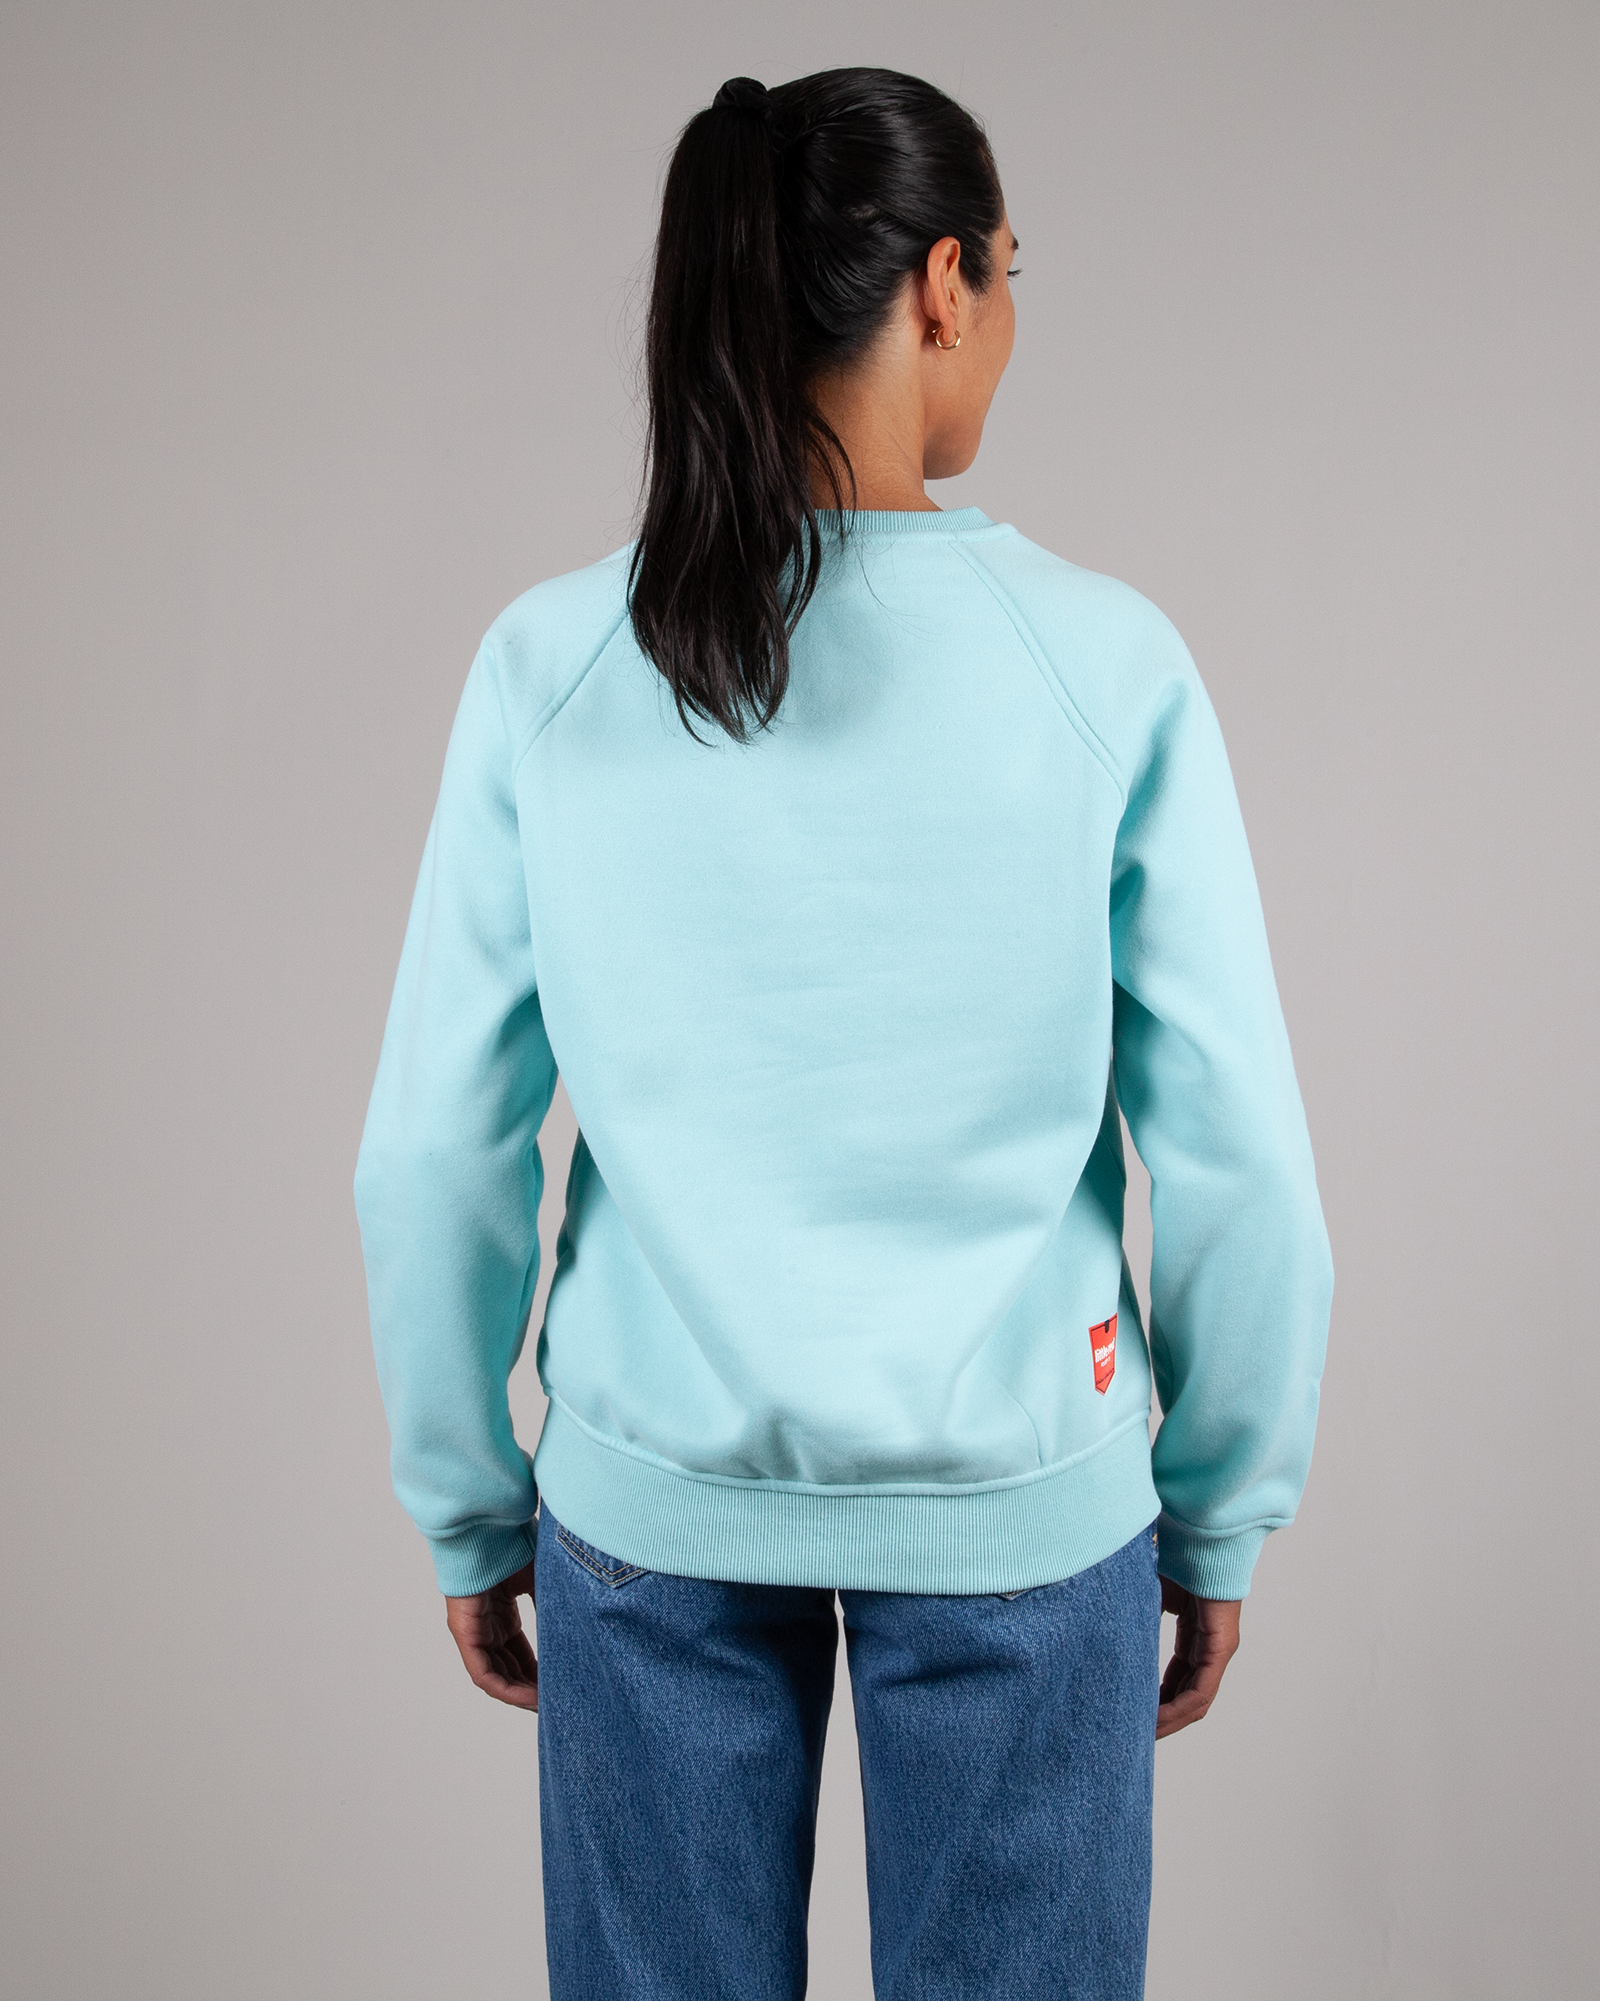 "Catch Some Clean Air" Female Crewneck Sweater - Turquoise